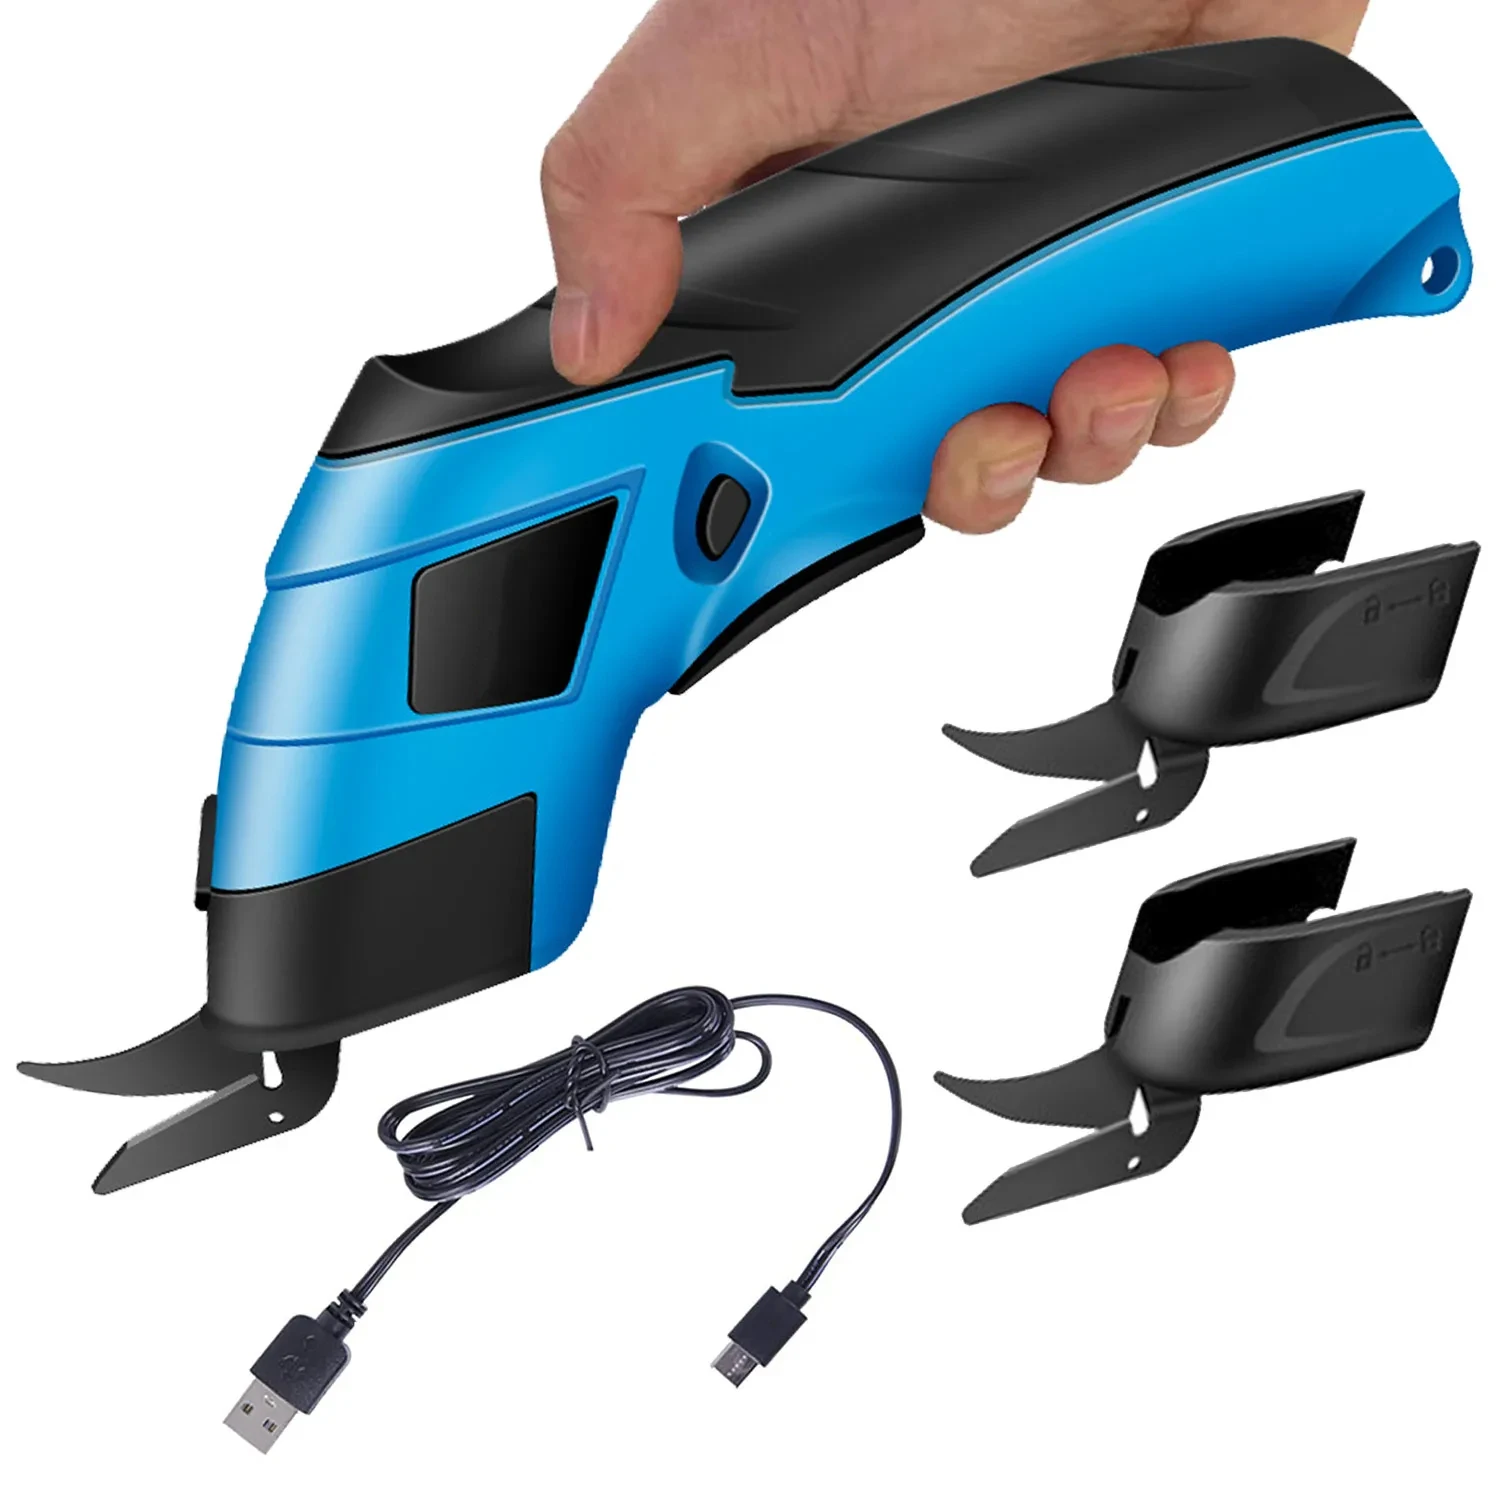 Electric Scissors Fabric Cutting Machine Leather Tailor Scissors With Tungsten Steel Blades USB Rechargeable Portable Power Tool